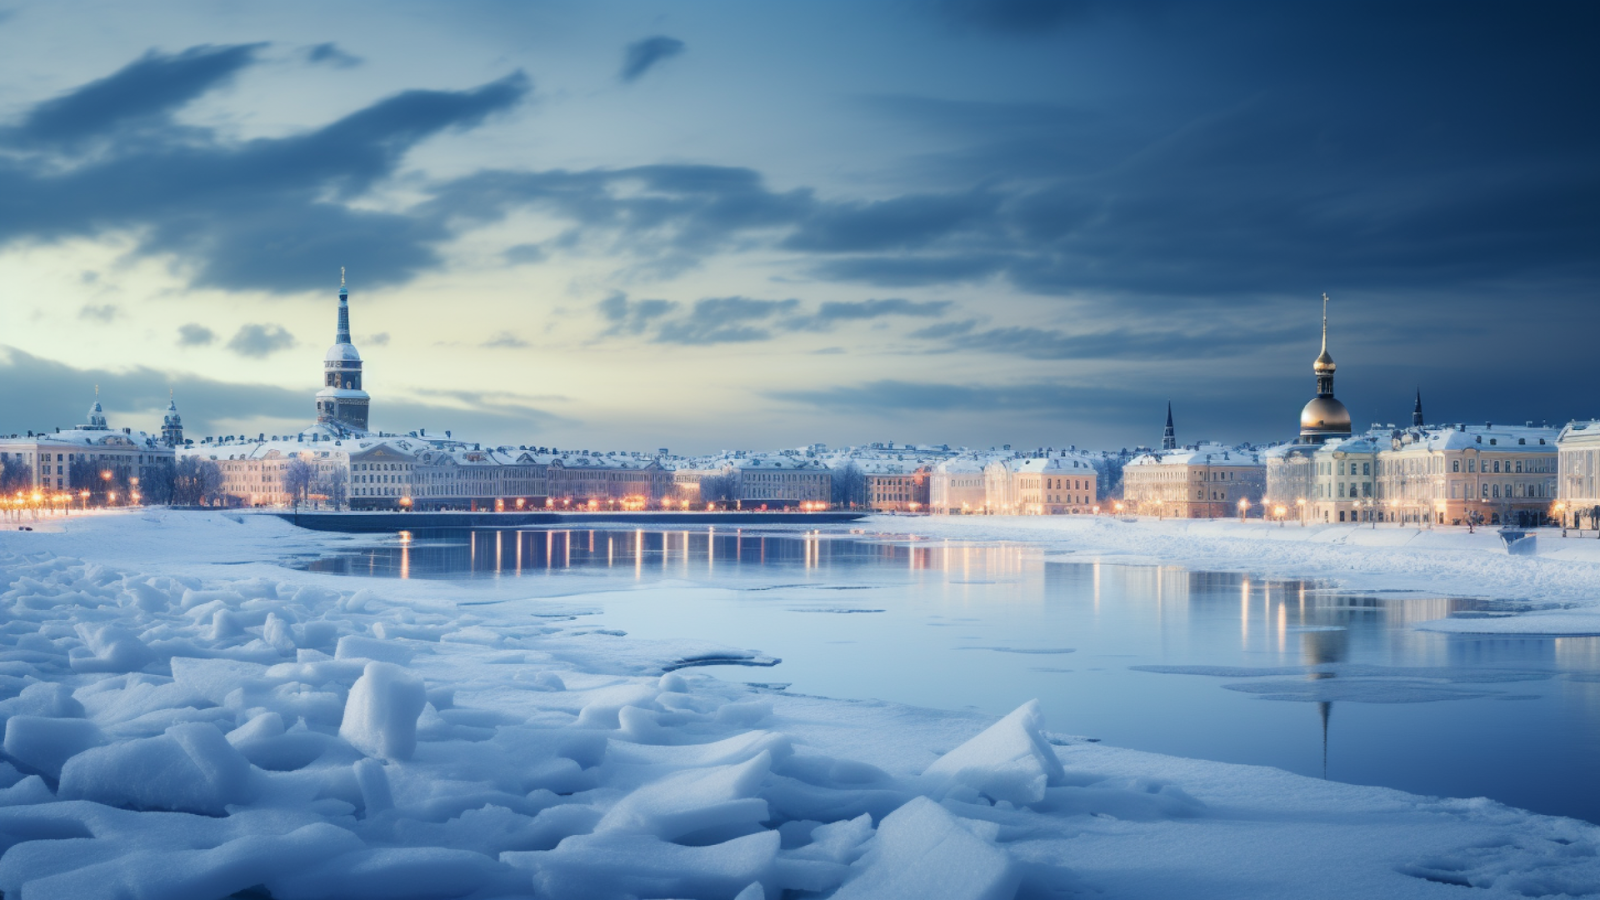 A serene winter scene of St. Petersburg with the frozen Neva River in the foreground, highlighting Russia's majestic winter destinations.